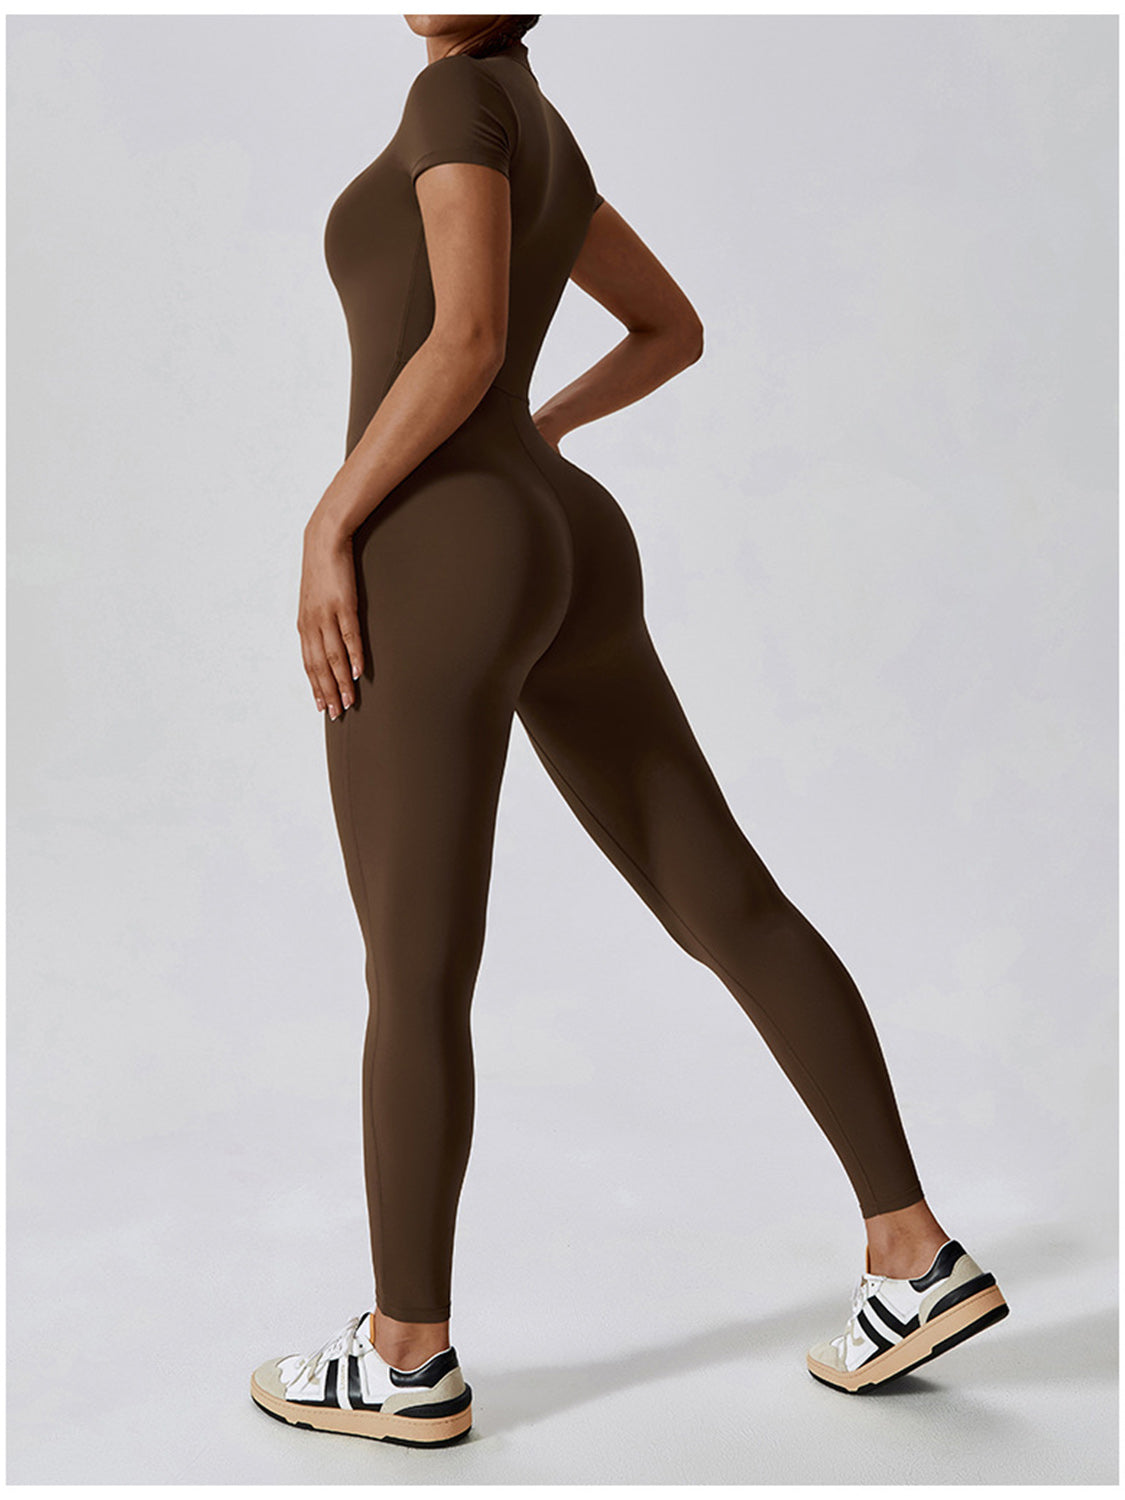 a woman in a brown bodysuit and sneakers